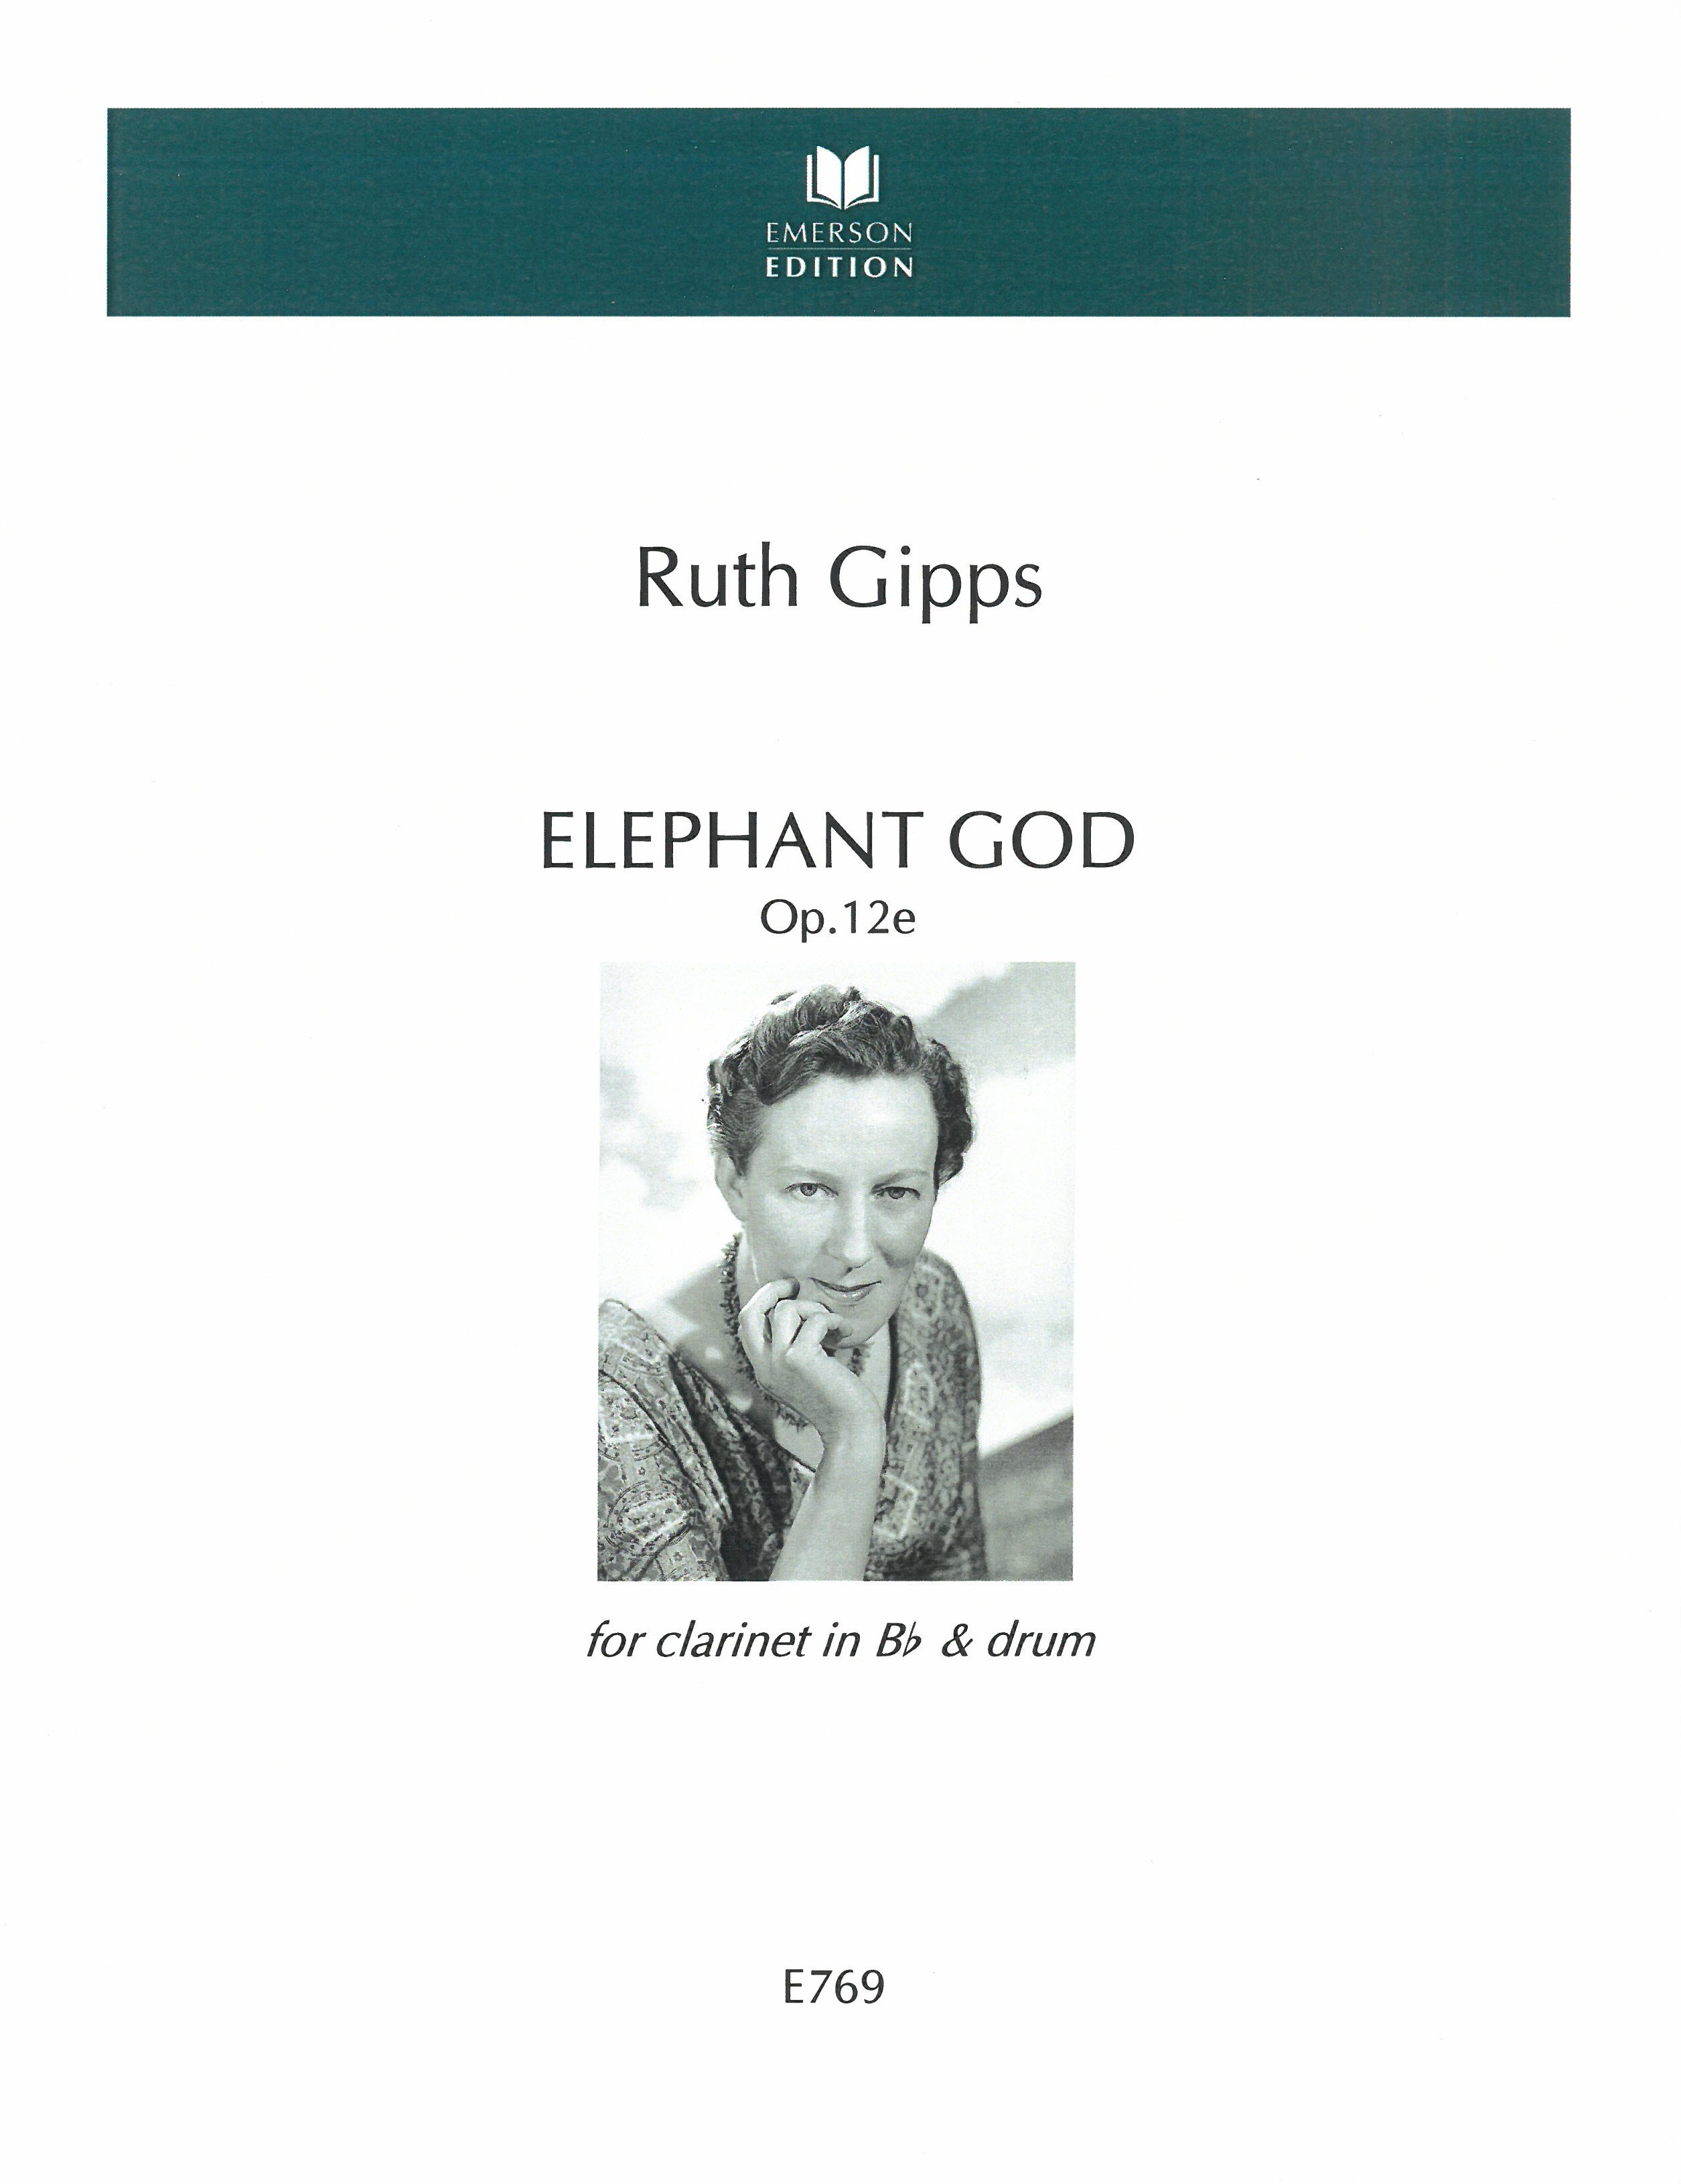 Elephant God, Op. 12e : For Clarinet In B Flat and Drum.